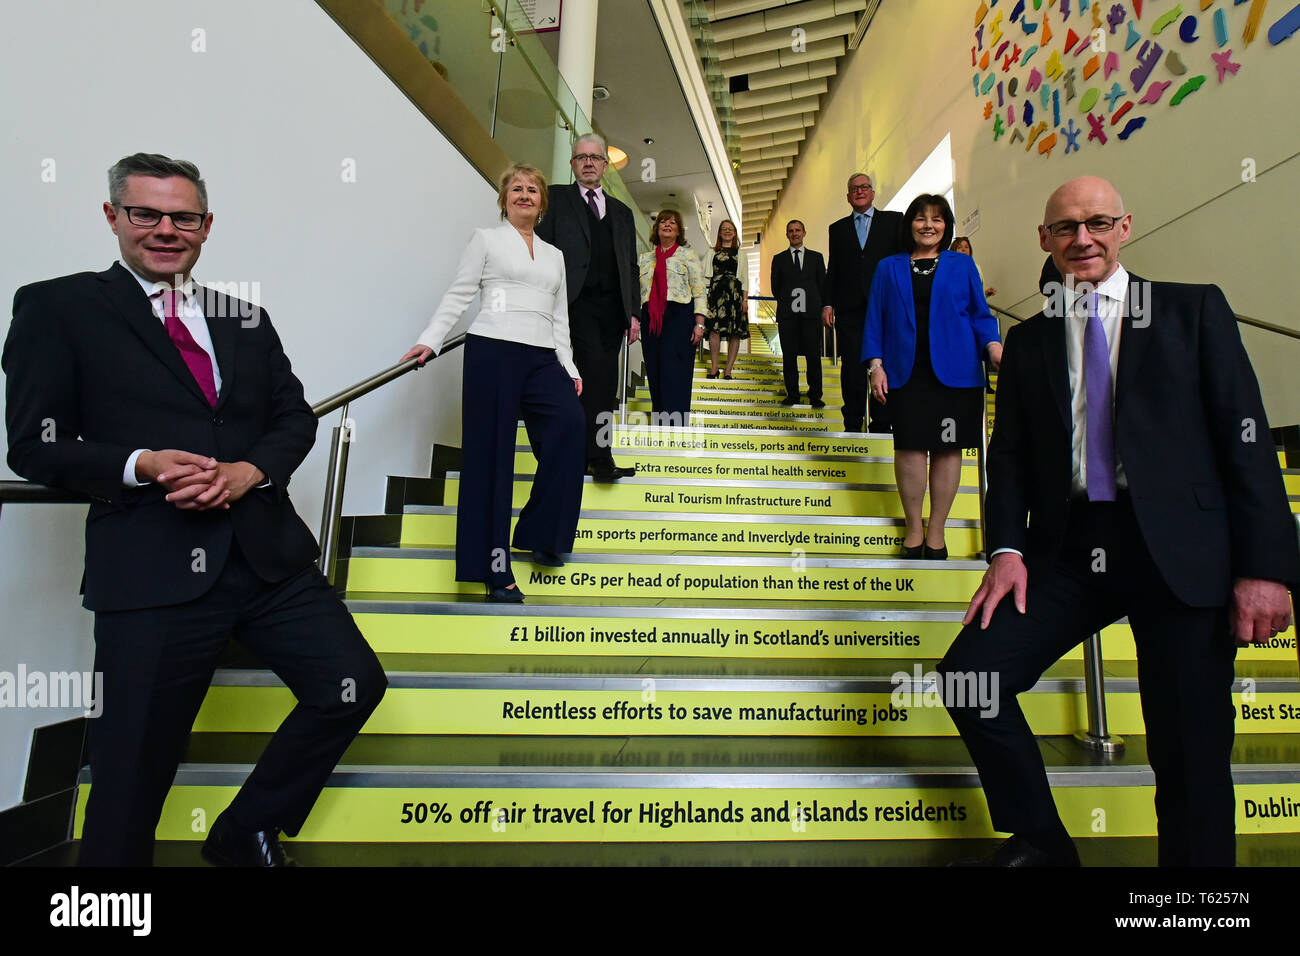 Edinburgh, UK. 28, April, 2019. Scotland's Deputy First Minister John Swinney (R) and Cabinet Secretaries pose for photographs on a staircase proclaiming several of the Scottish Government's claimed achievements at  the Scottish National Party's  Spring Conference in the Edinburgh International Conference Centre, © Ken Jack / Alamy Live News Stock Photo